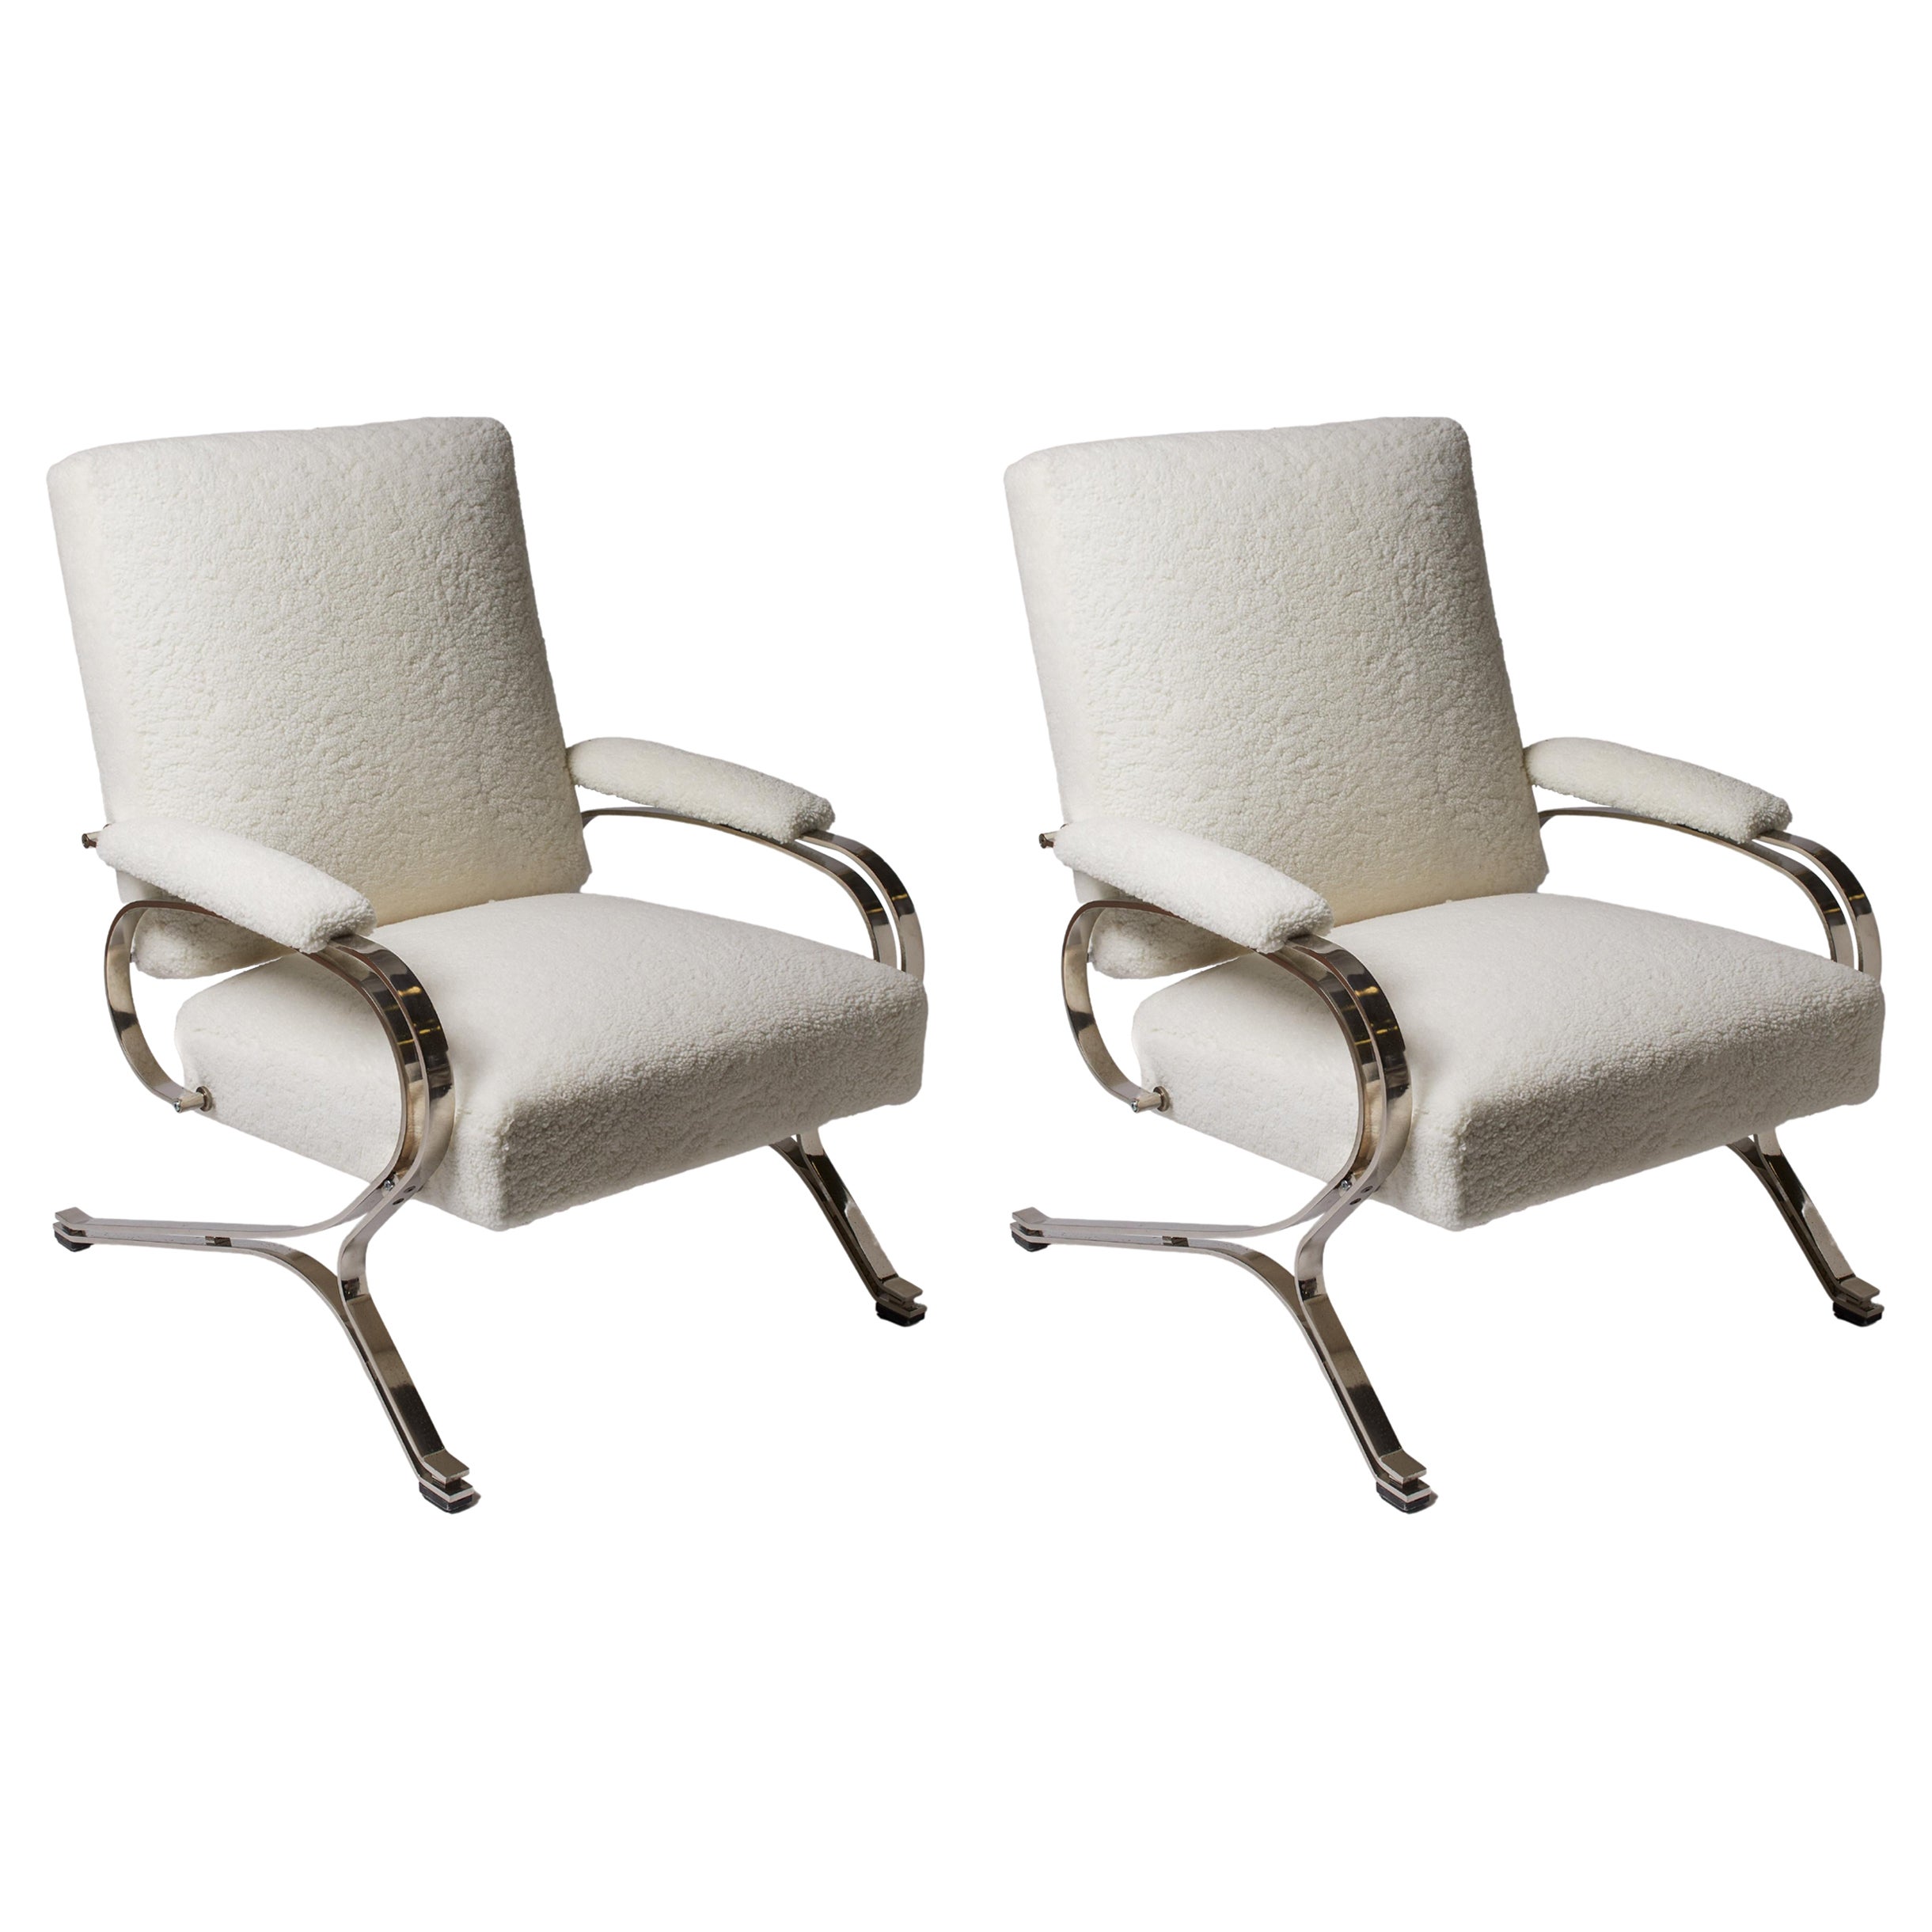 1970s Italian Pair of Gianni Moscatelli White Shearling and Chrome Chairs